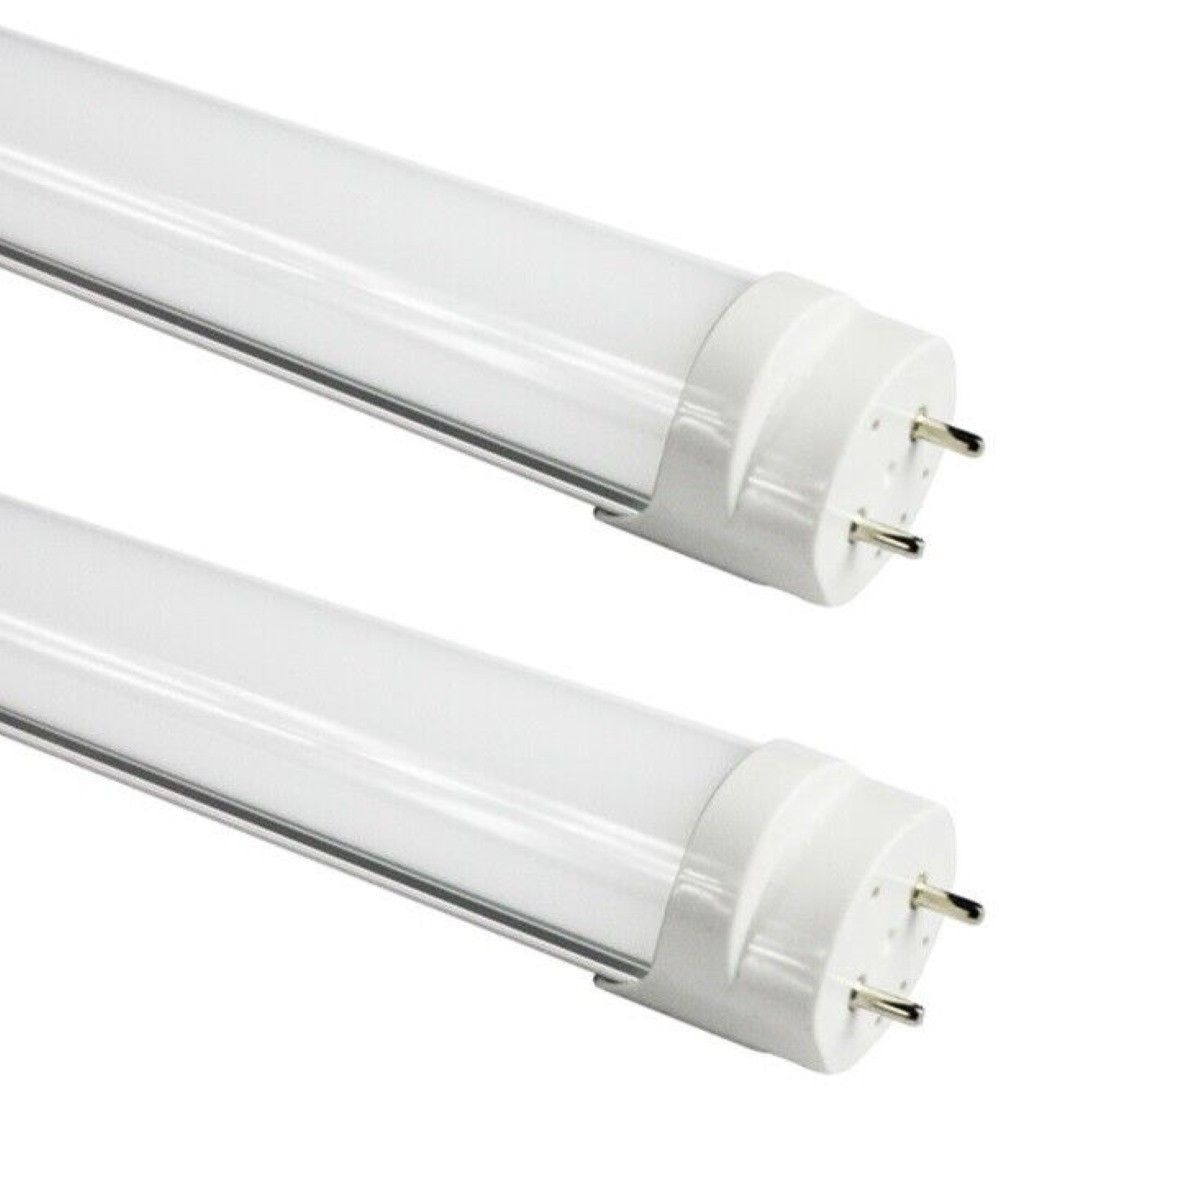 11 Best 36 Inch Led Light Replacement For Fluorescent Tubes For 2023 1693815955 